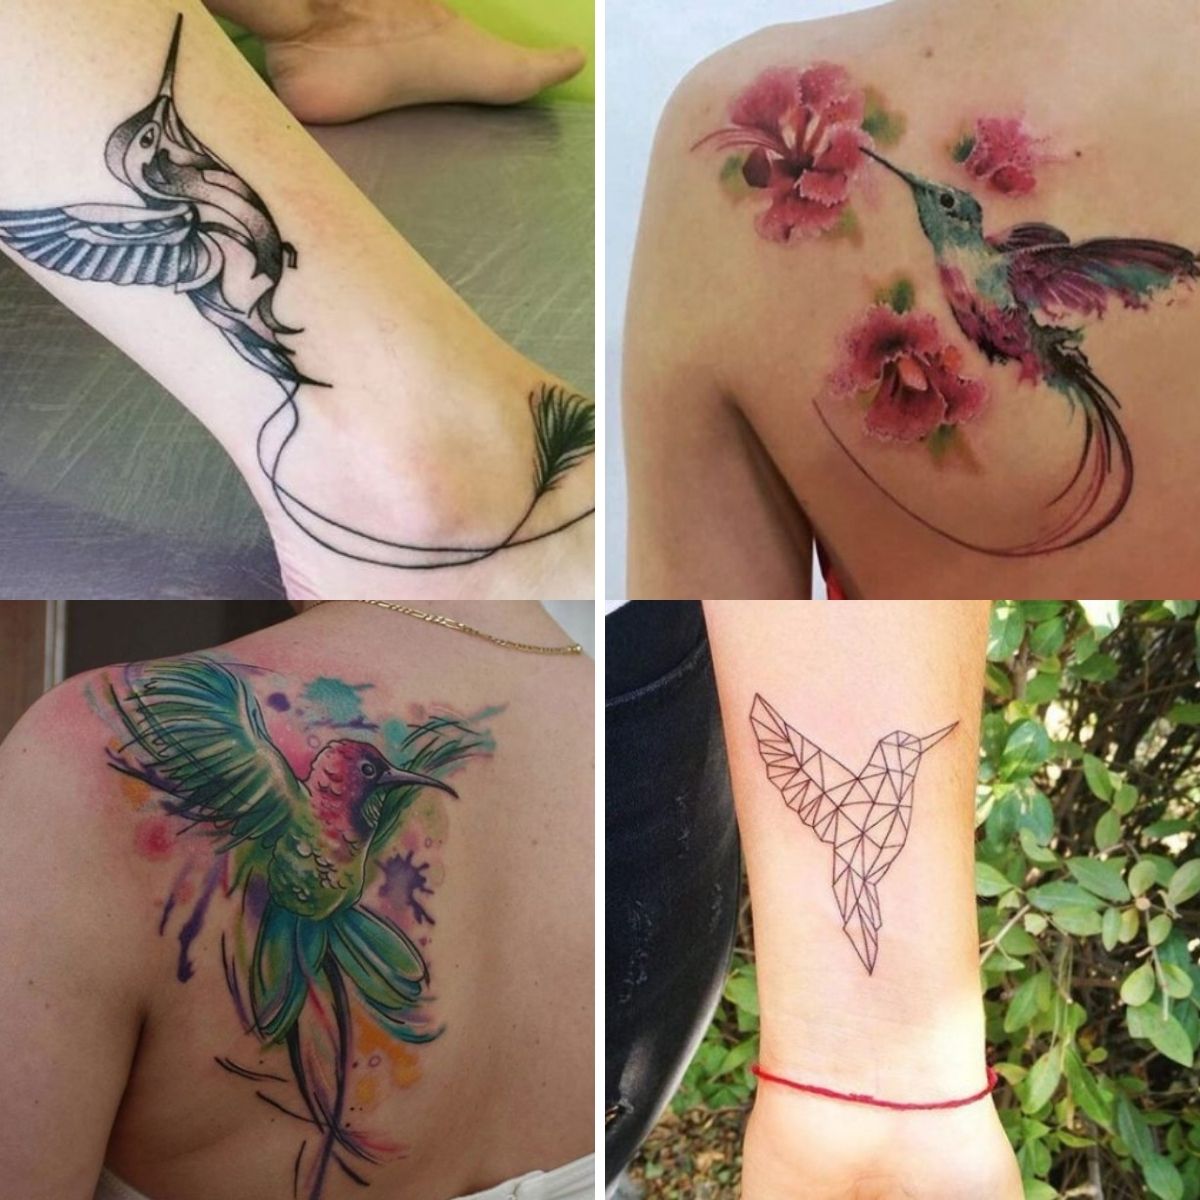 Simply Inked Hummingbird Tattoo Love of Animal Temporary Tattoo Sticker  For Women  Colour Black for All Occasion  Walmartcom